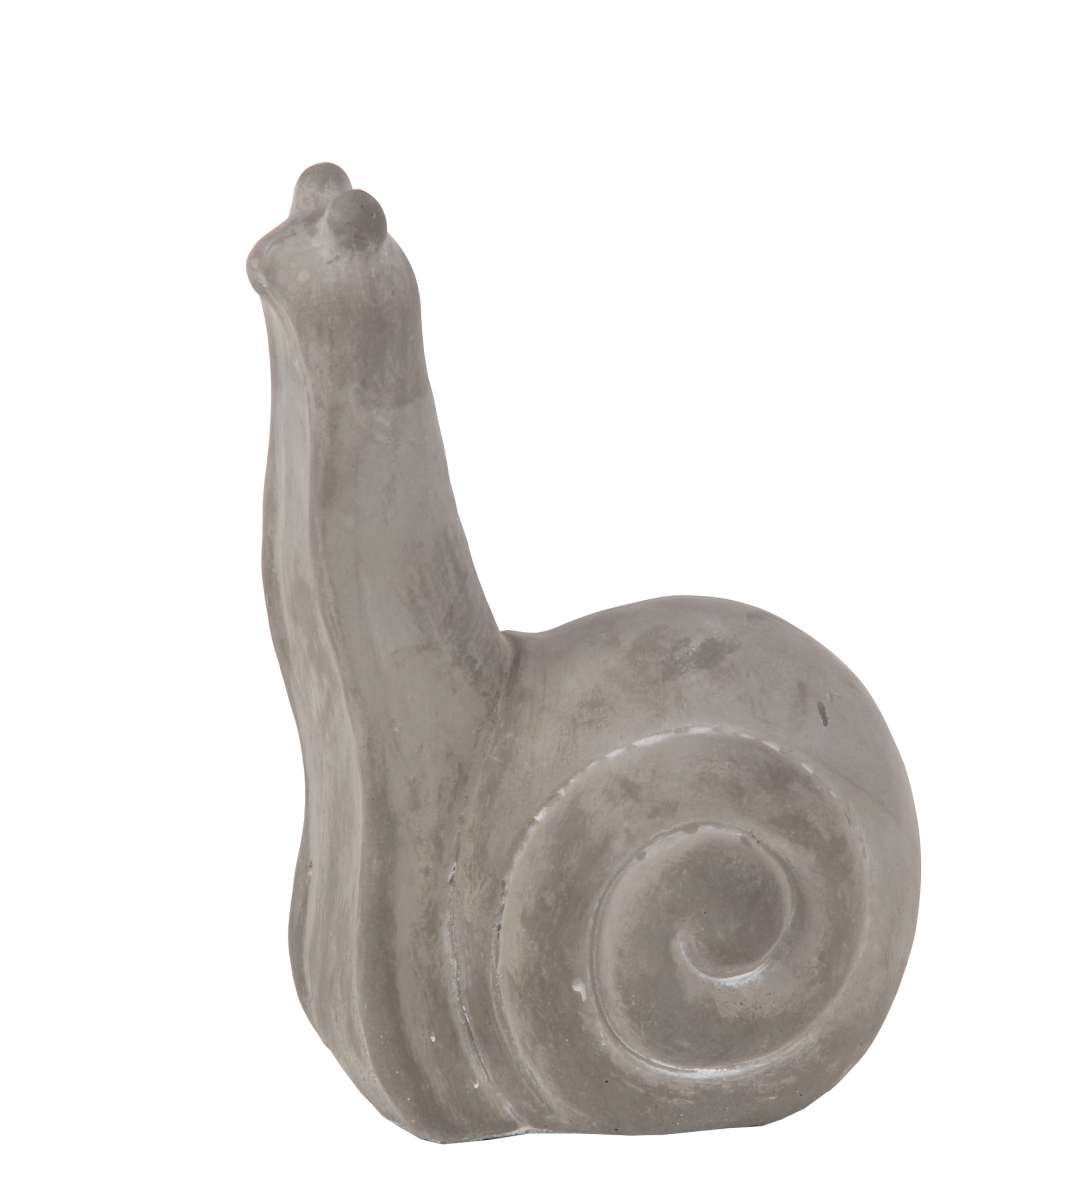 007-00012 6 X 4 X 8.5 In. Traditional Cement Snail, Grey